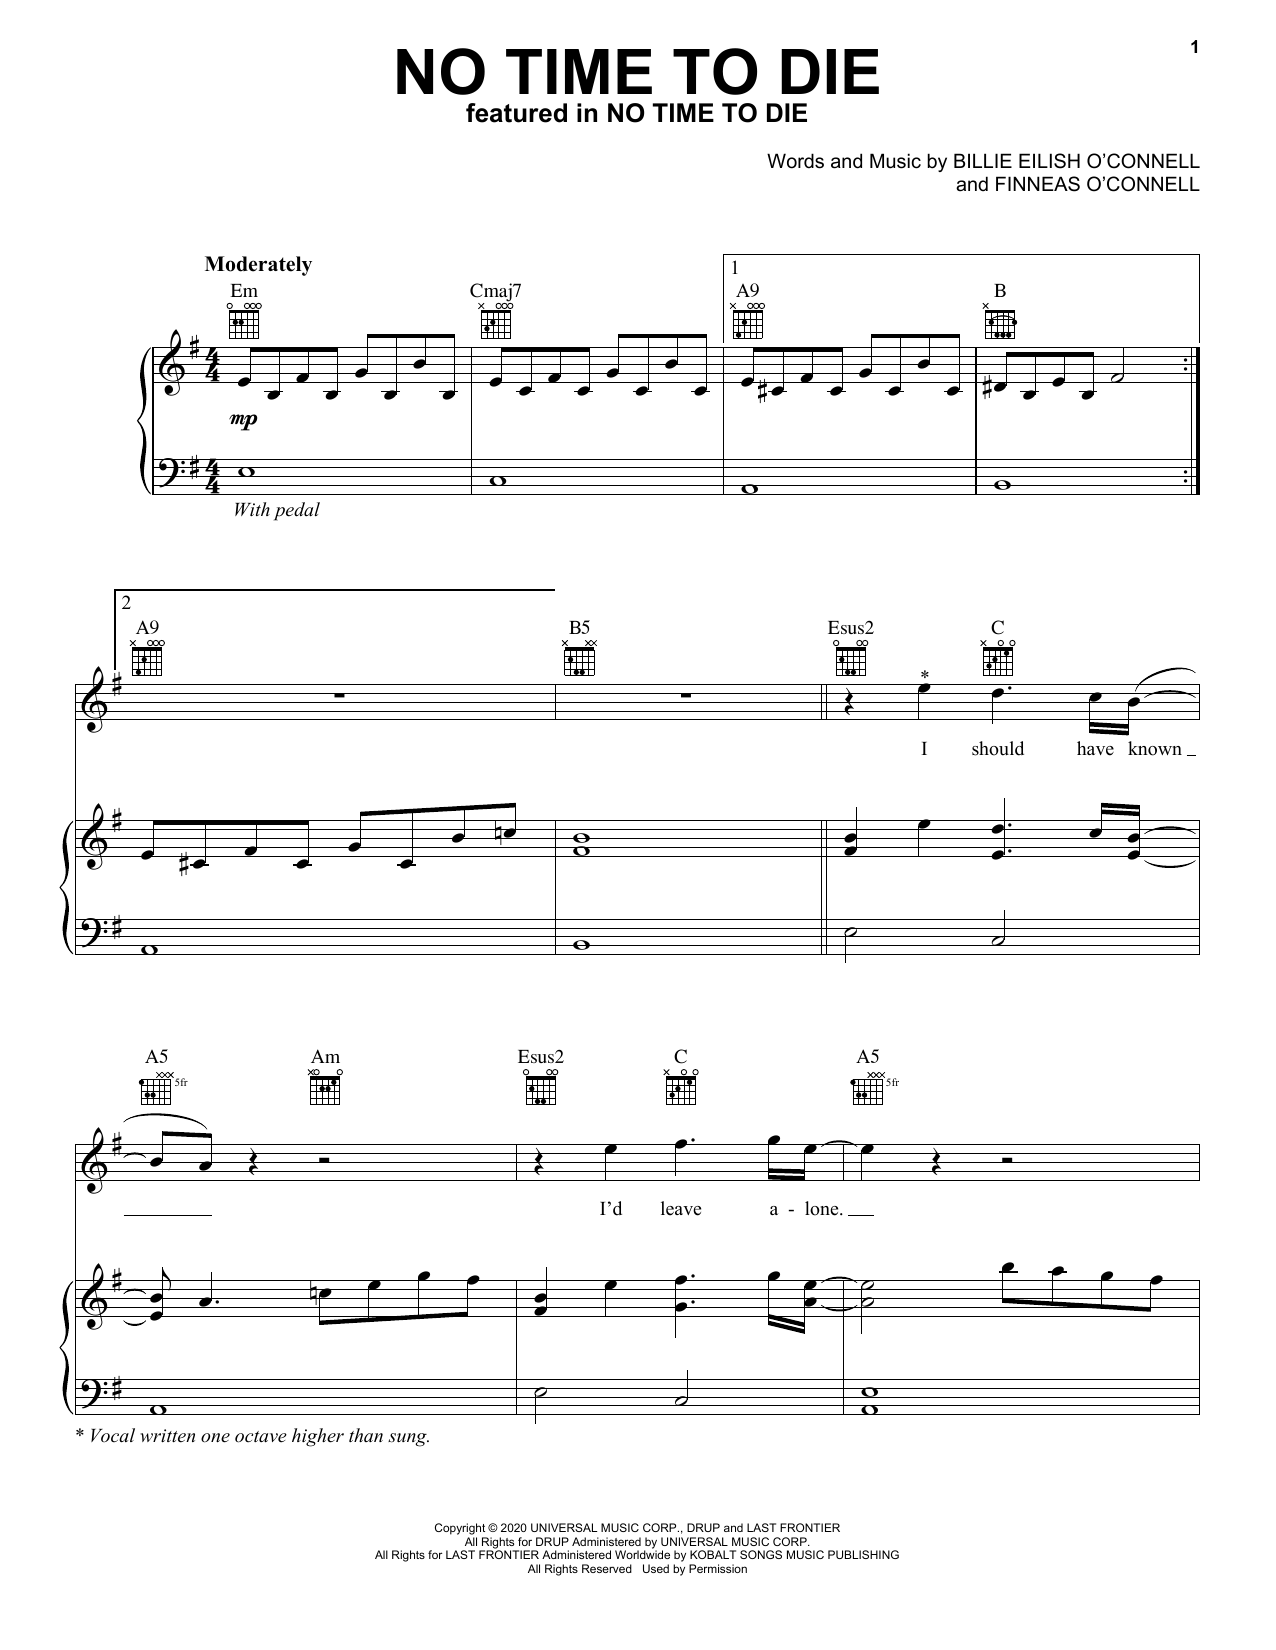 Billie Eilish No Time To Die sheet music notes and chords. Download Printable PDF.